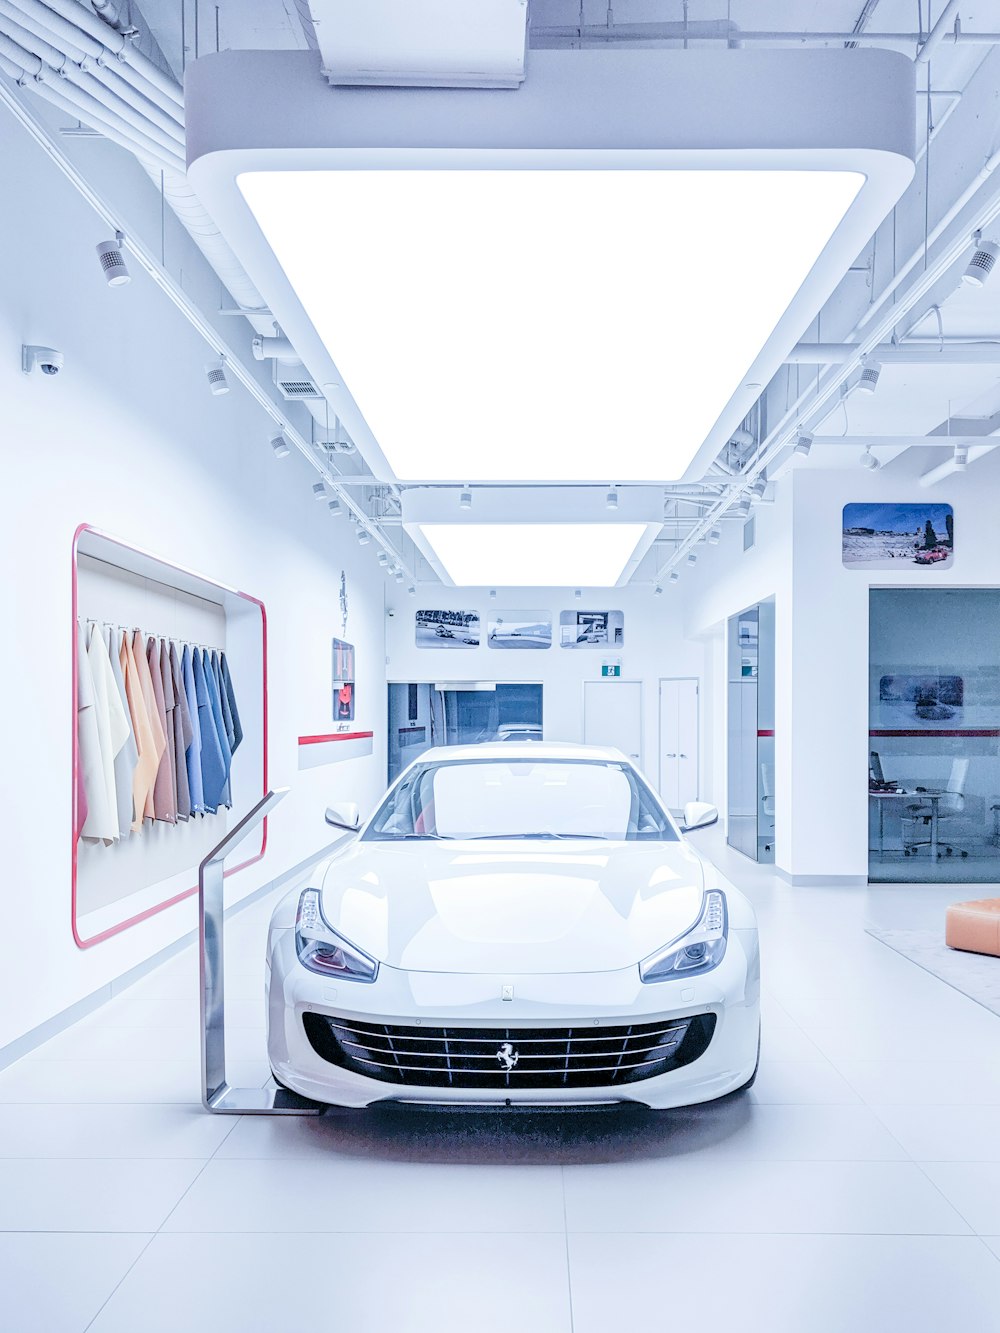 white Ferrari inside white building with hanged clothes